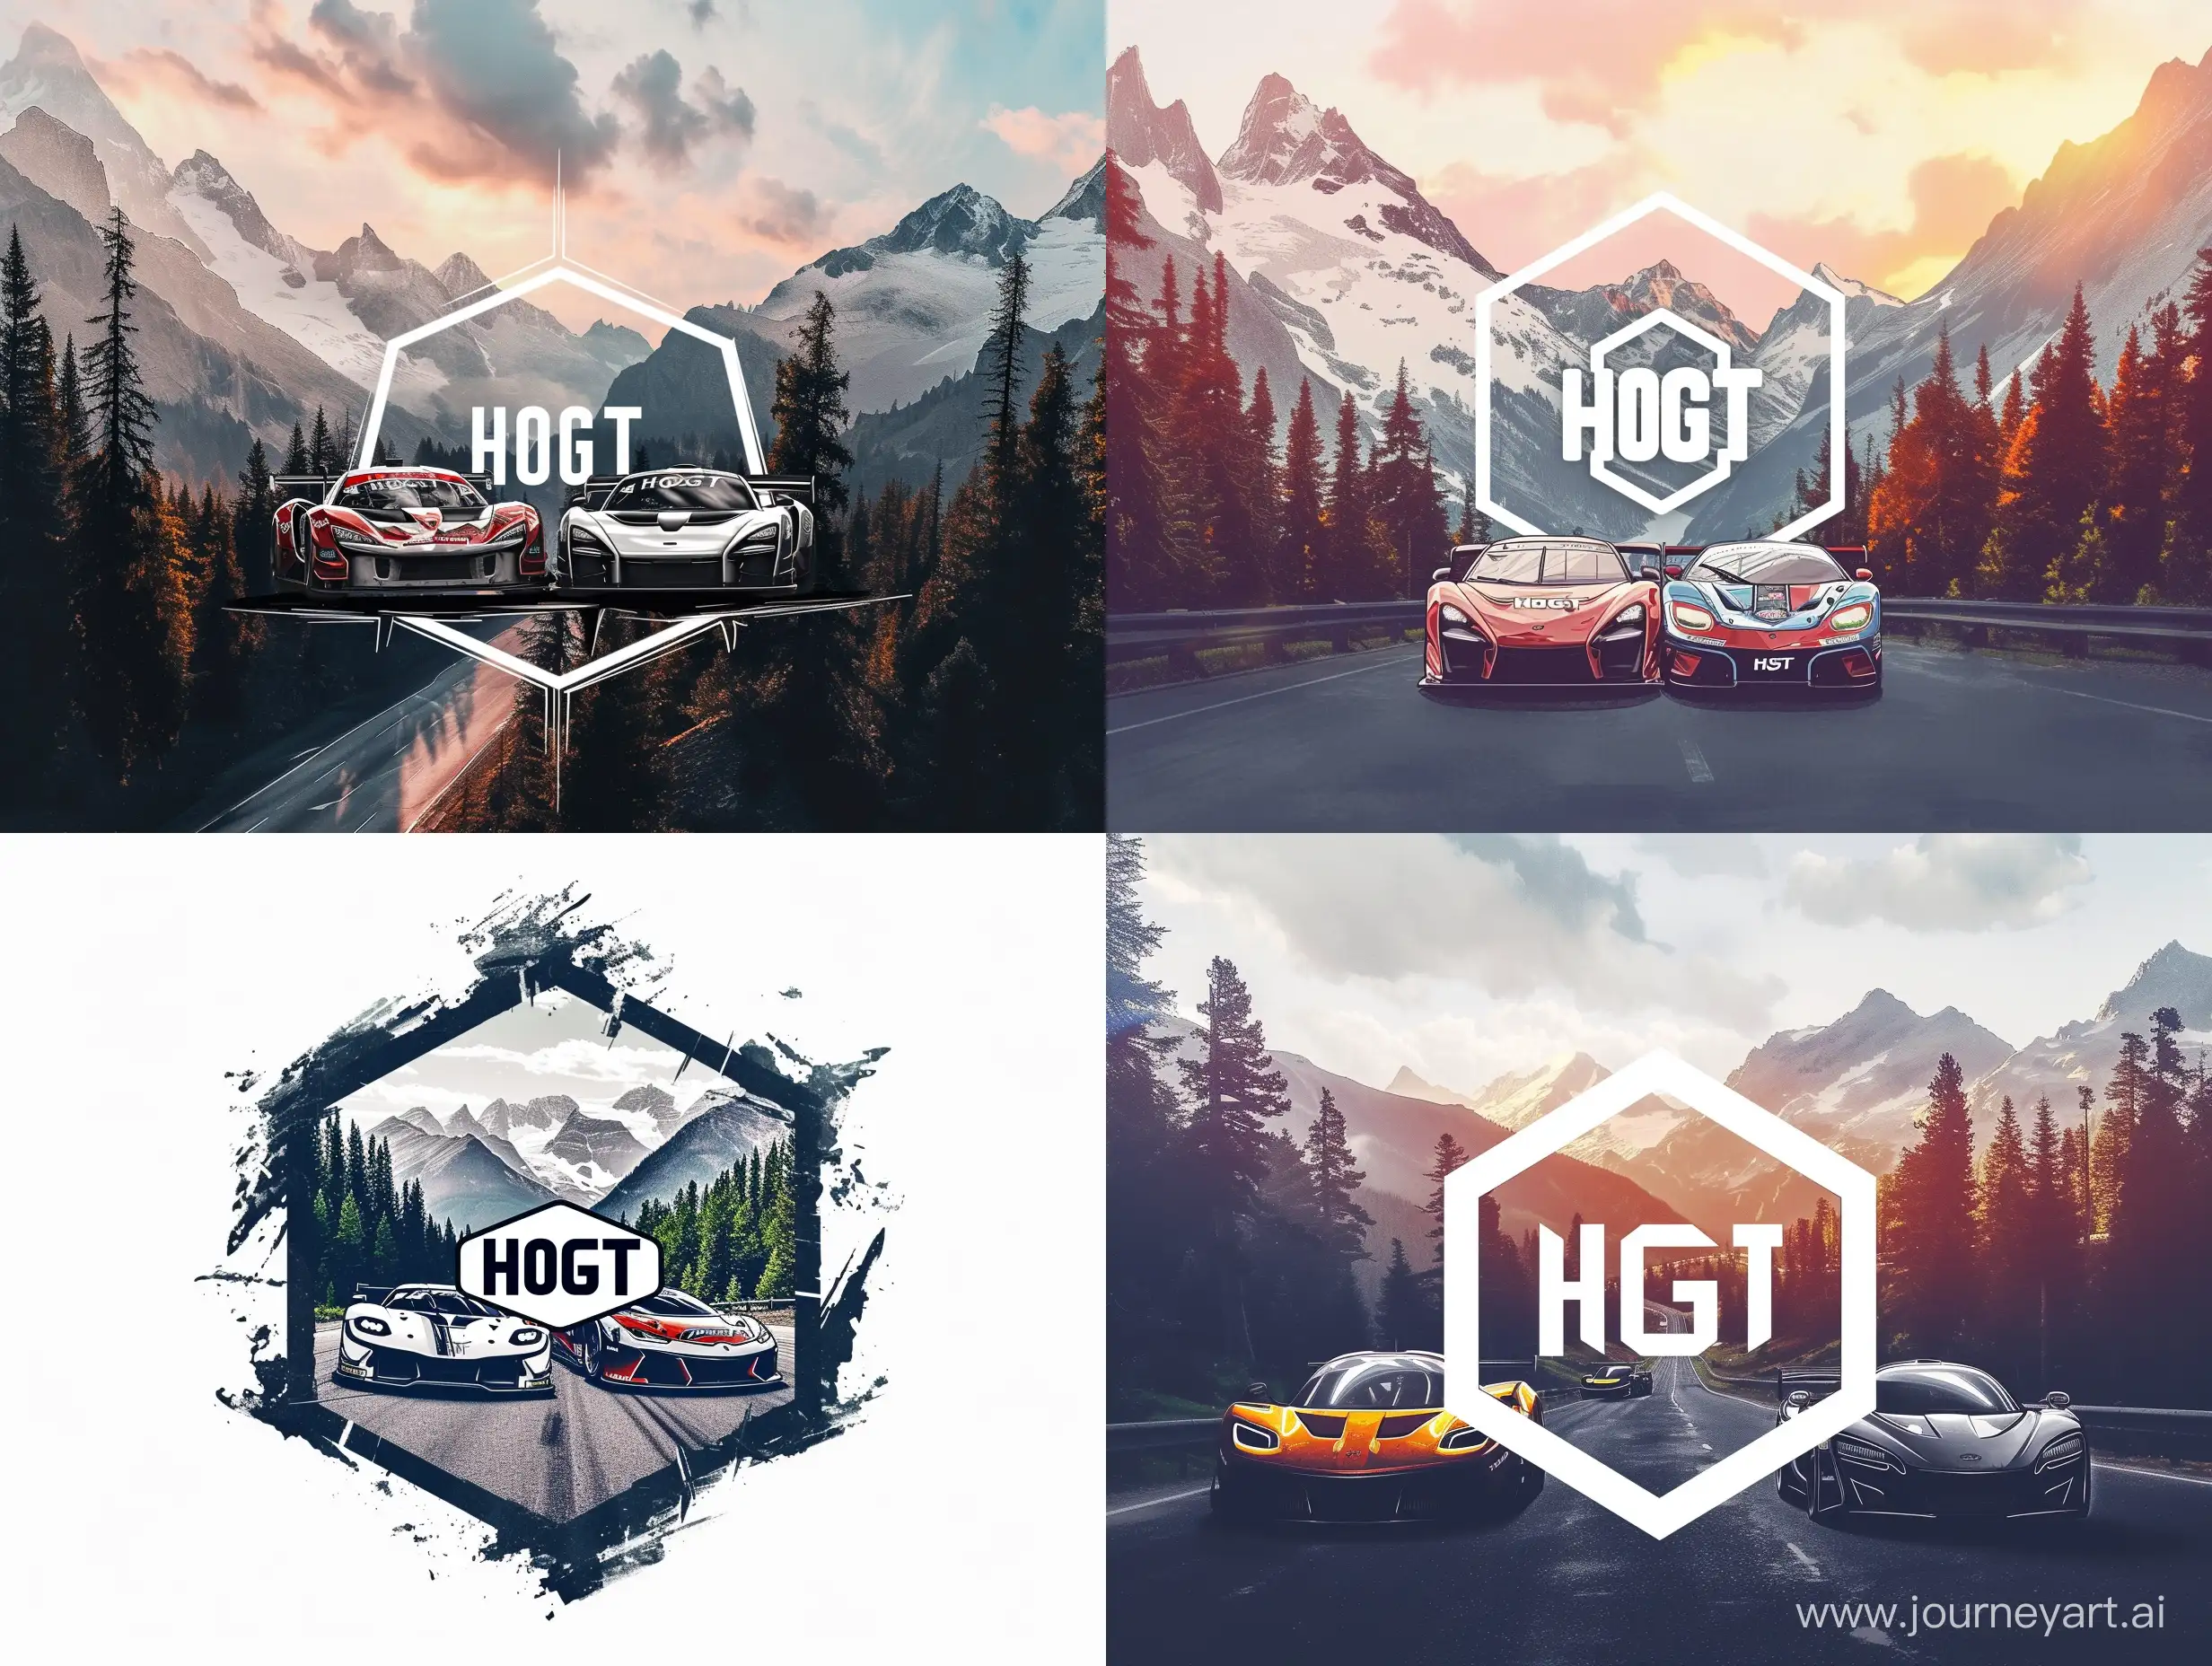 Dynamic-Octagonal-Car-Race-Logo-with-HoGT-Tag-and-Scenic-Mountain-Backdrop